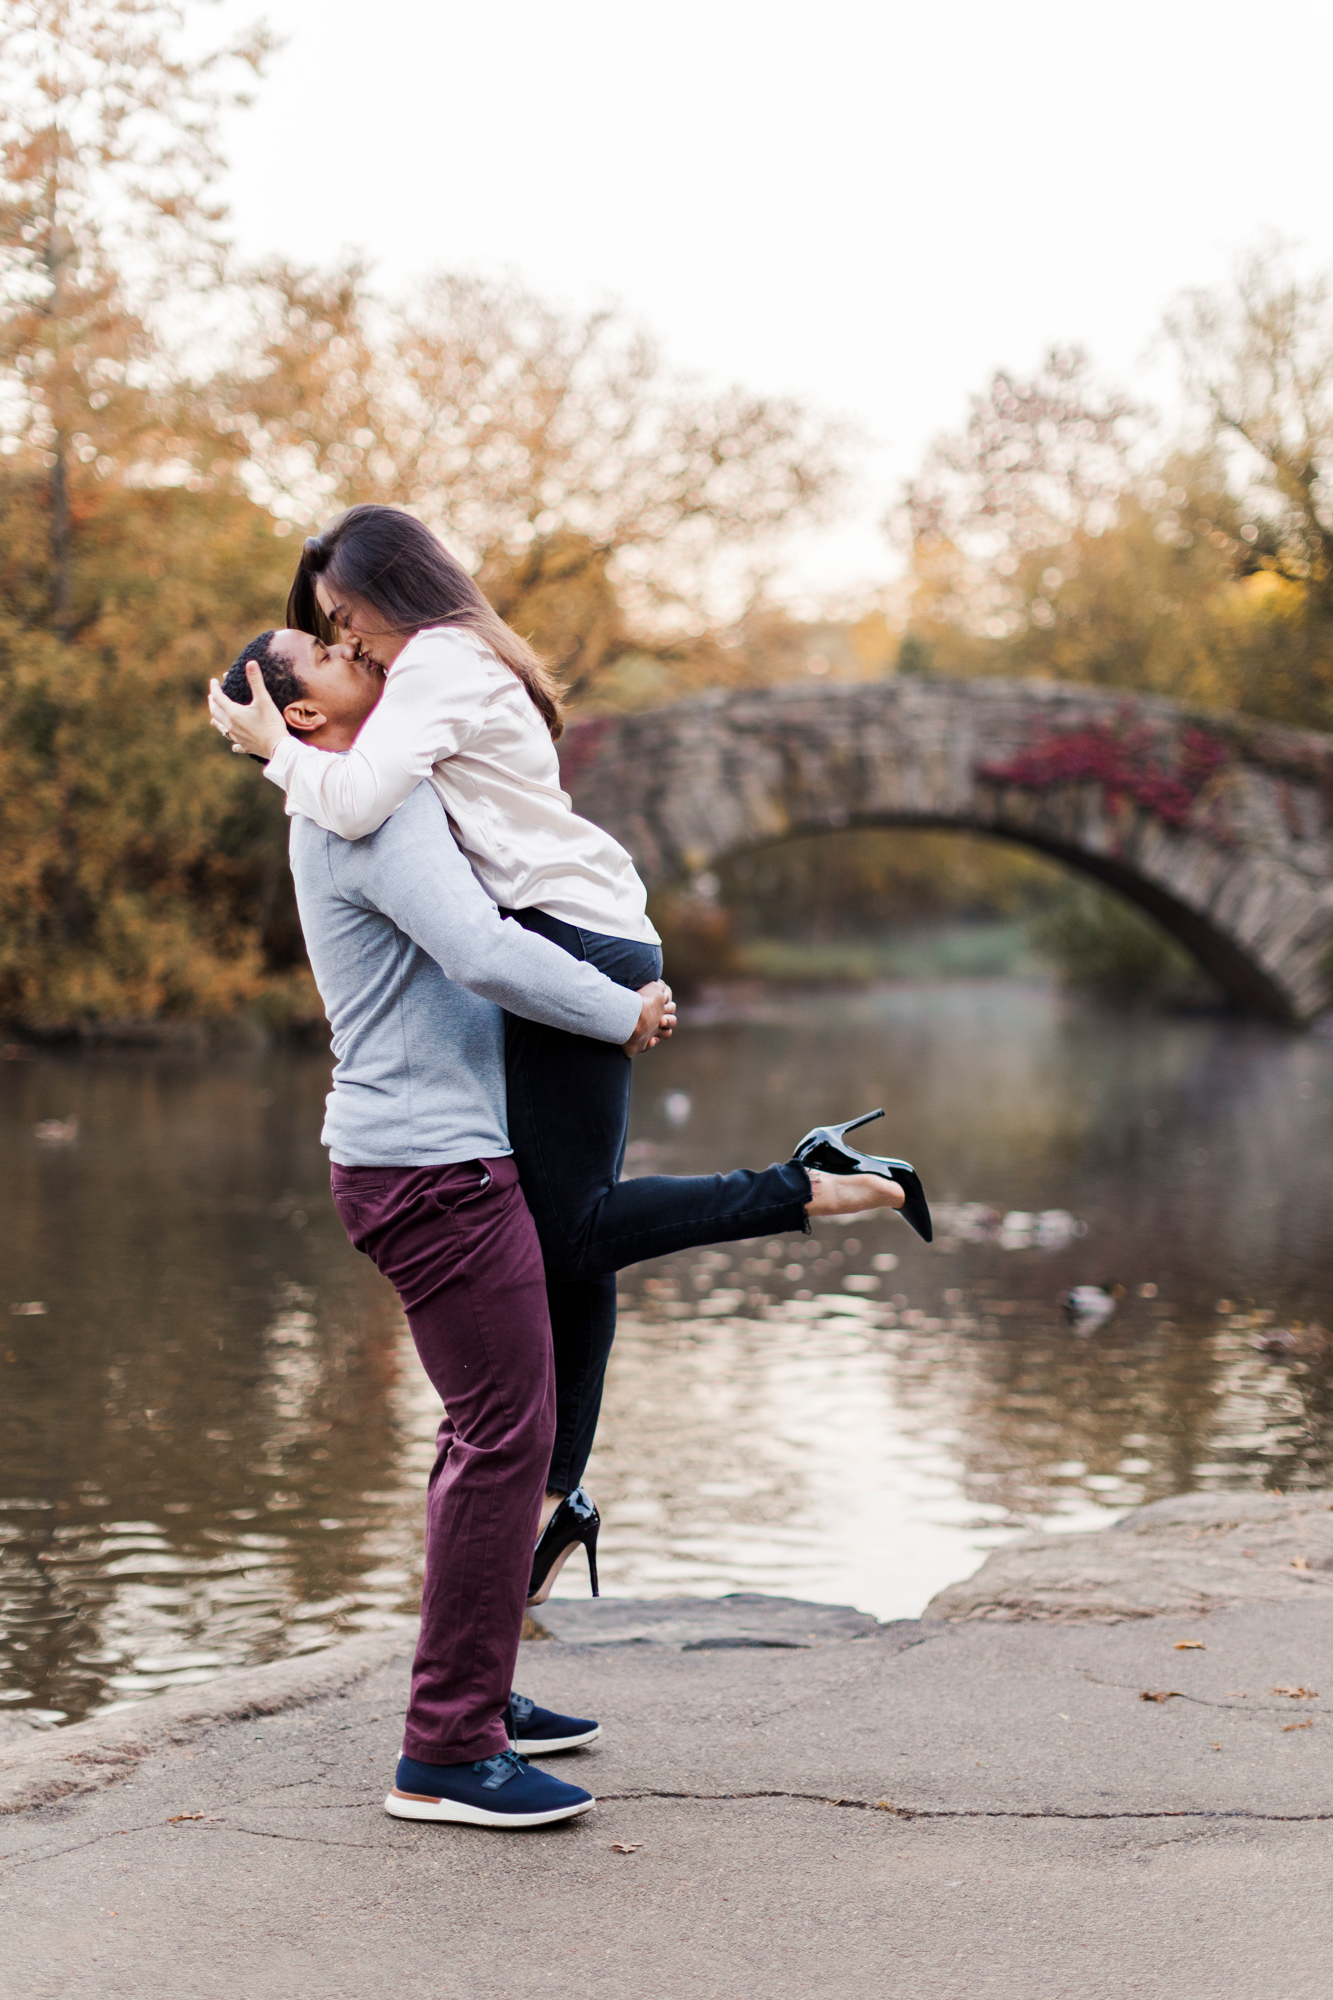 Elegant Pose Ideas for your Engagement Session